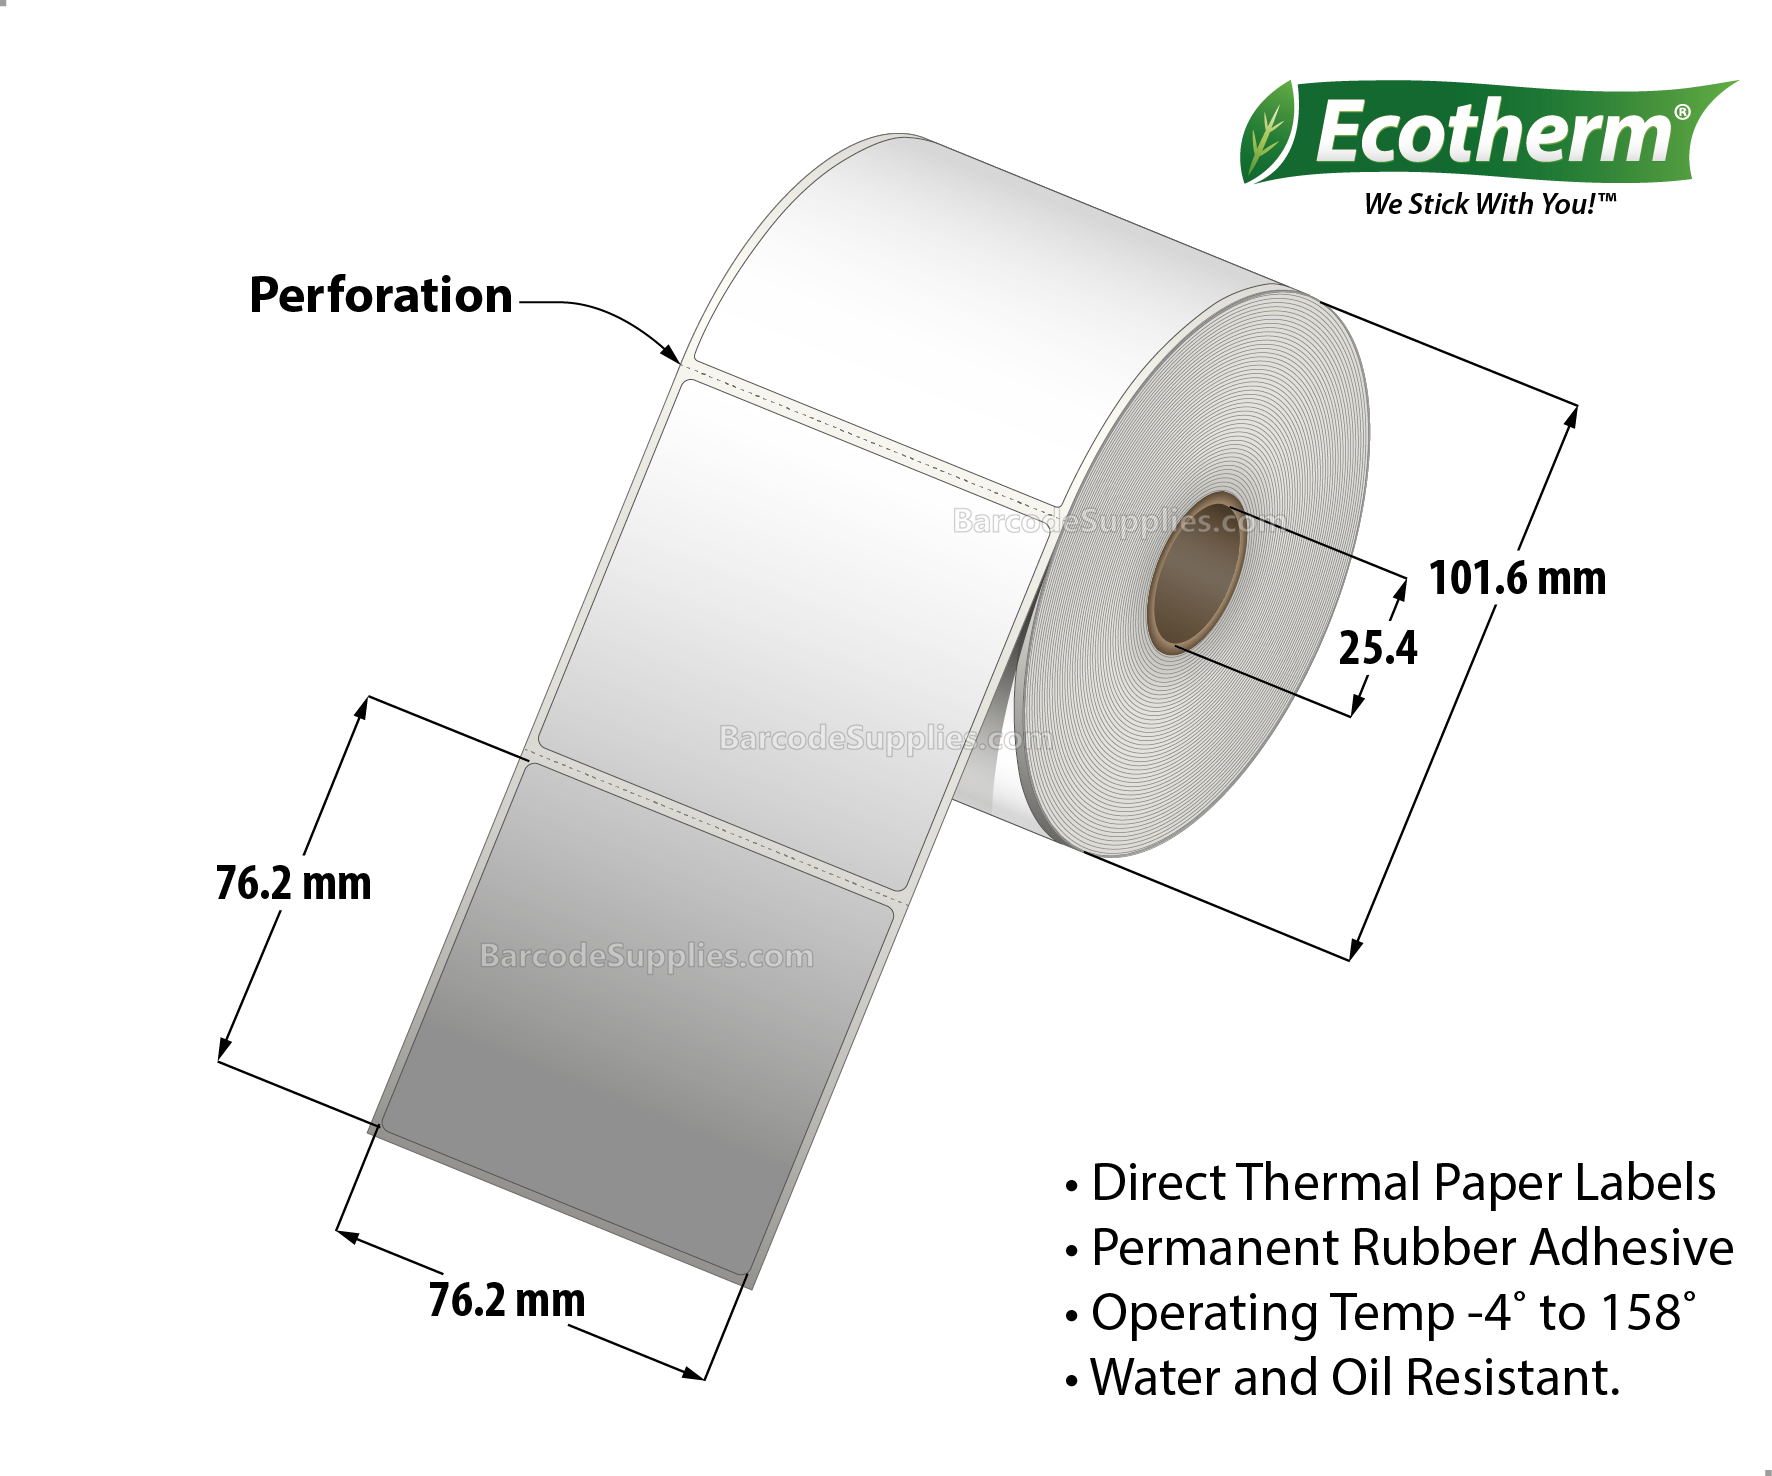 3 x 3 Direct Thermal White Labels With Rubber Adhesive - Perforated - 525 Labels Per Roll - Carton Of 4 Rolls - 2100 Labels Total - MPN: ECOTHERM14123-4